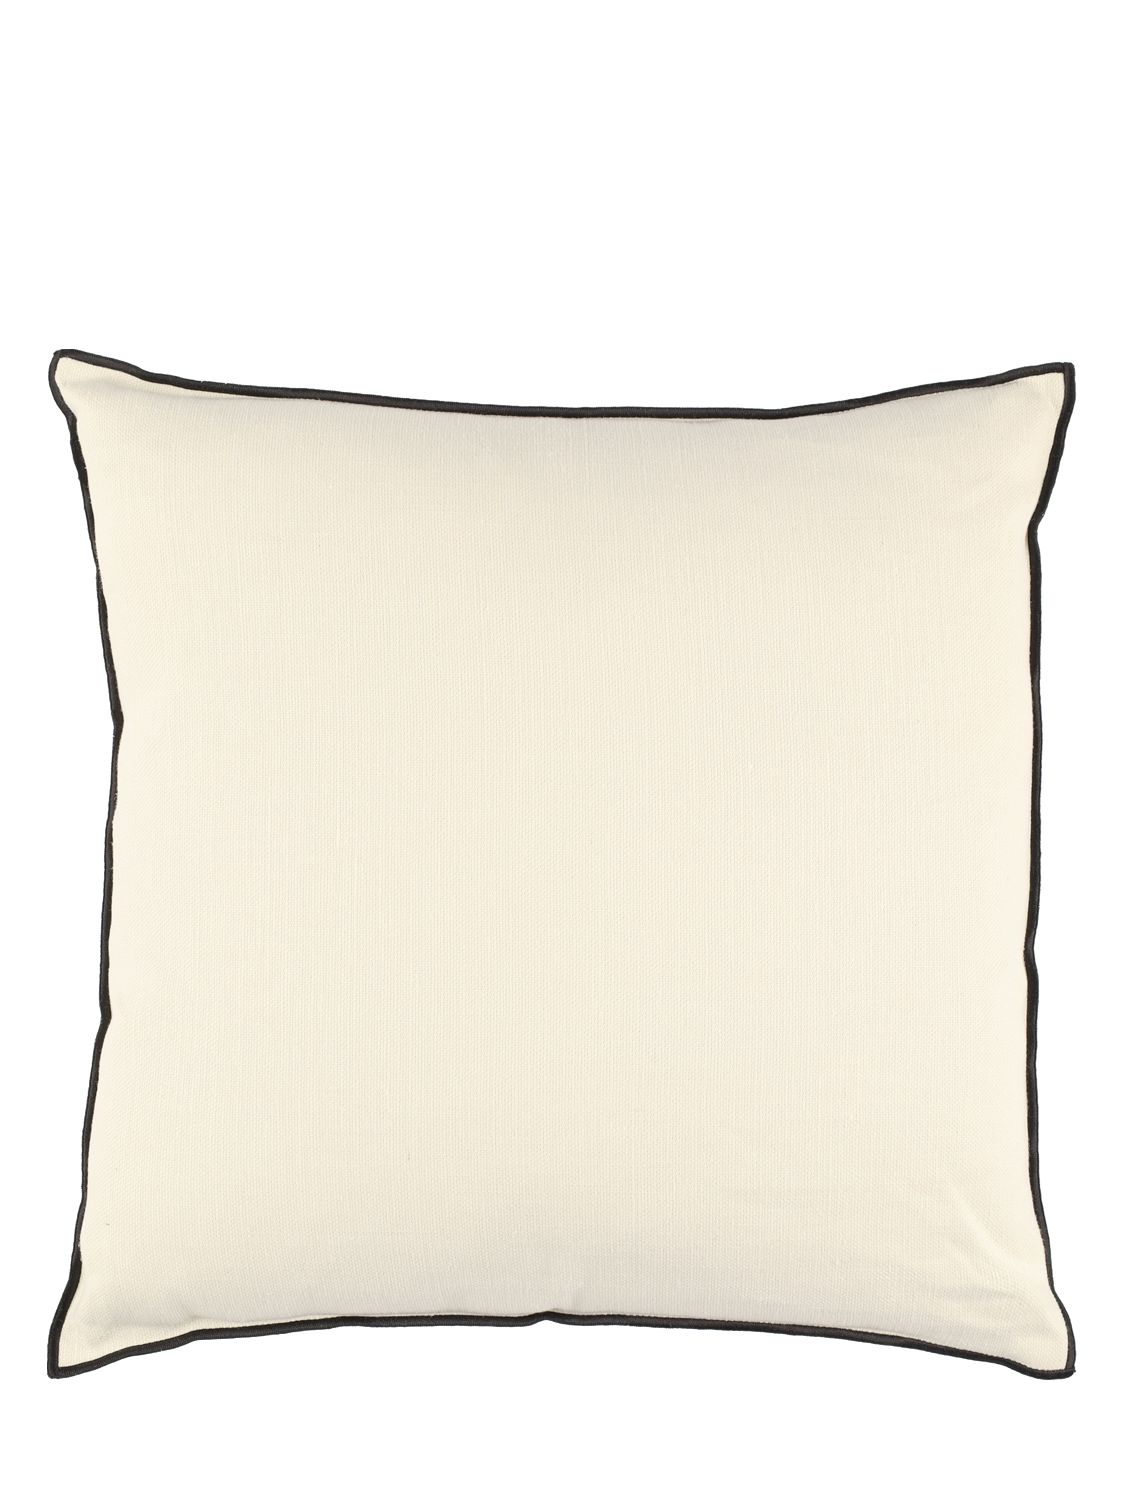 Image of Outline Cushion